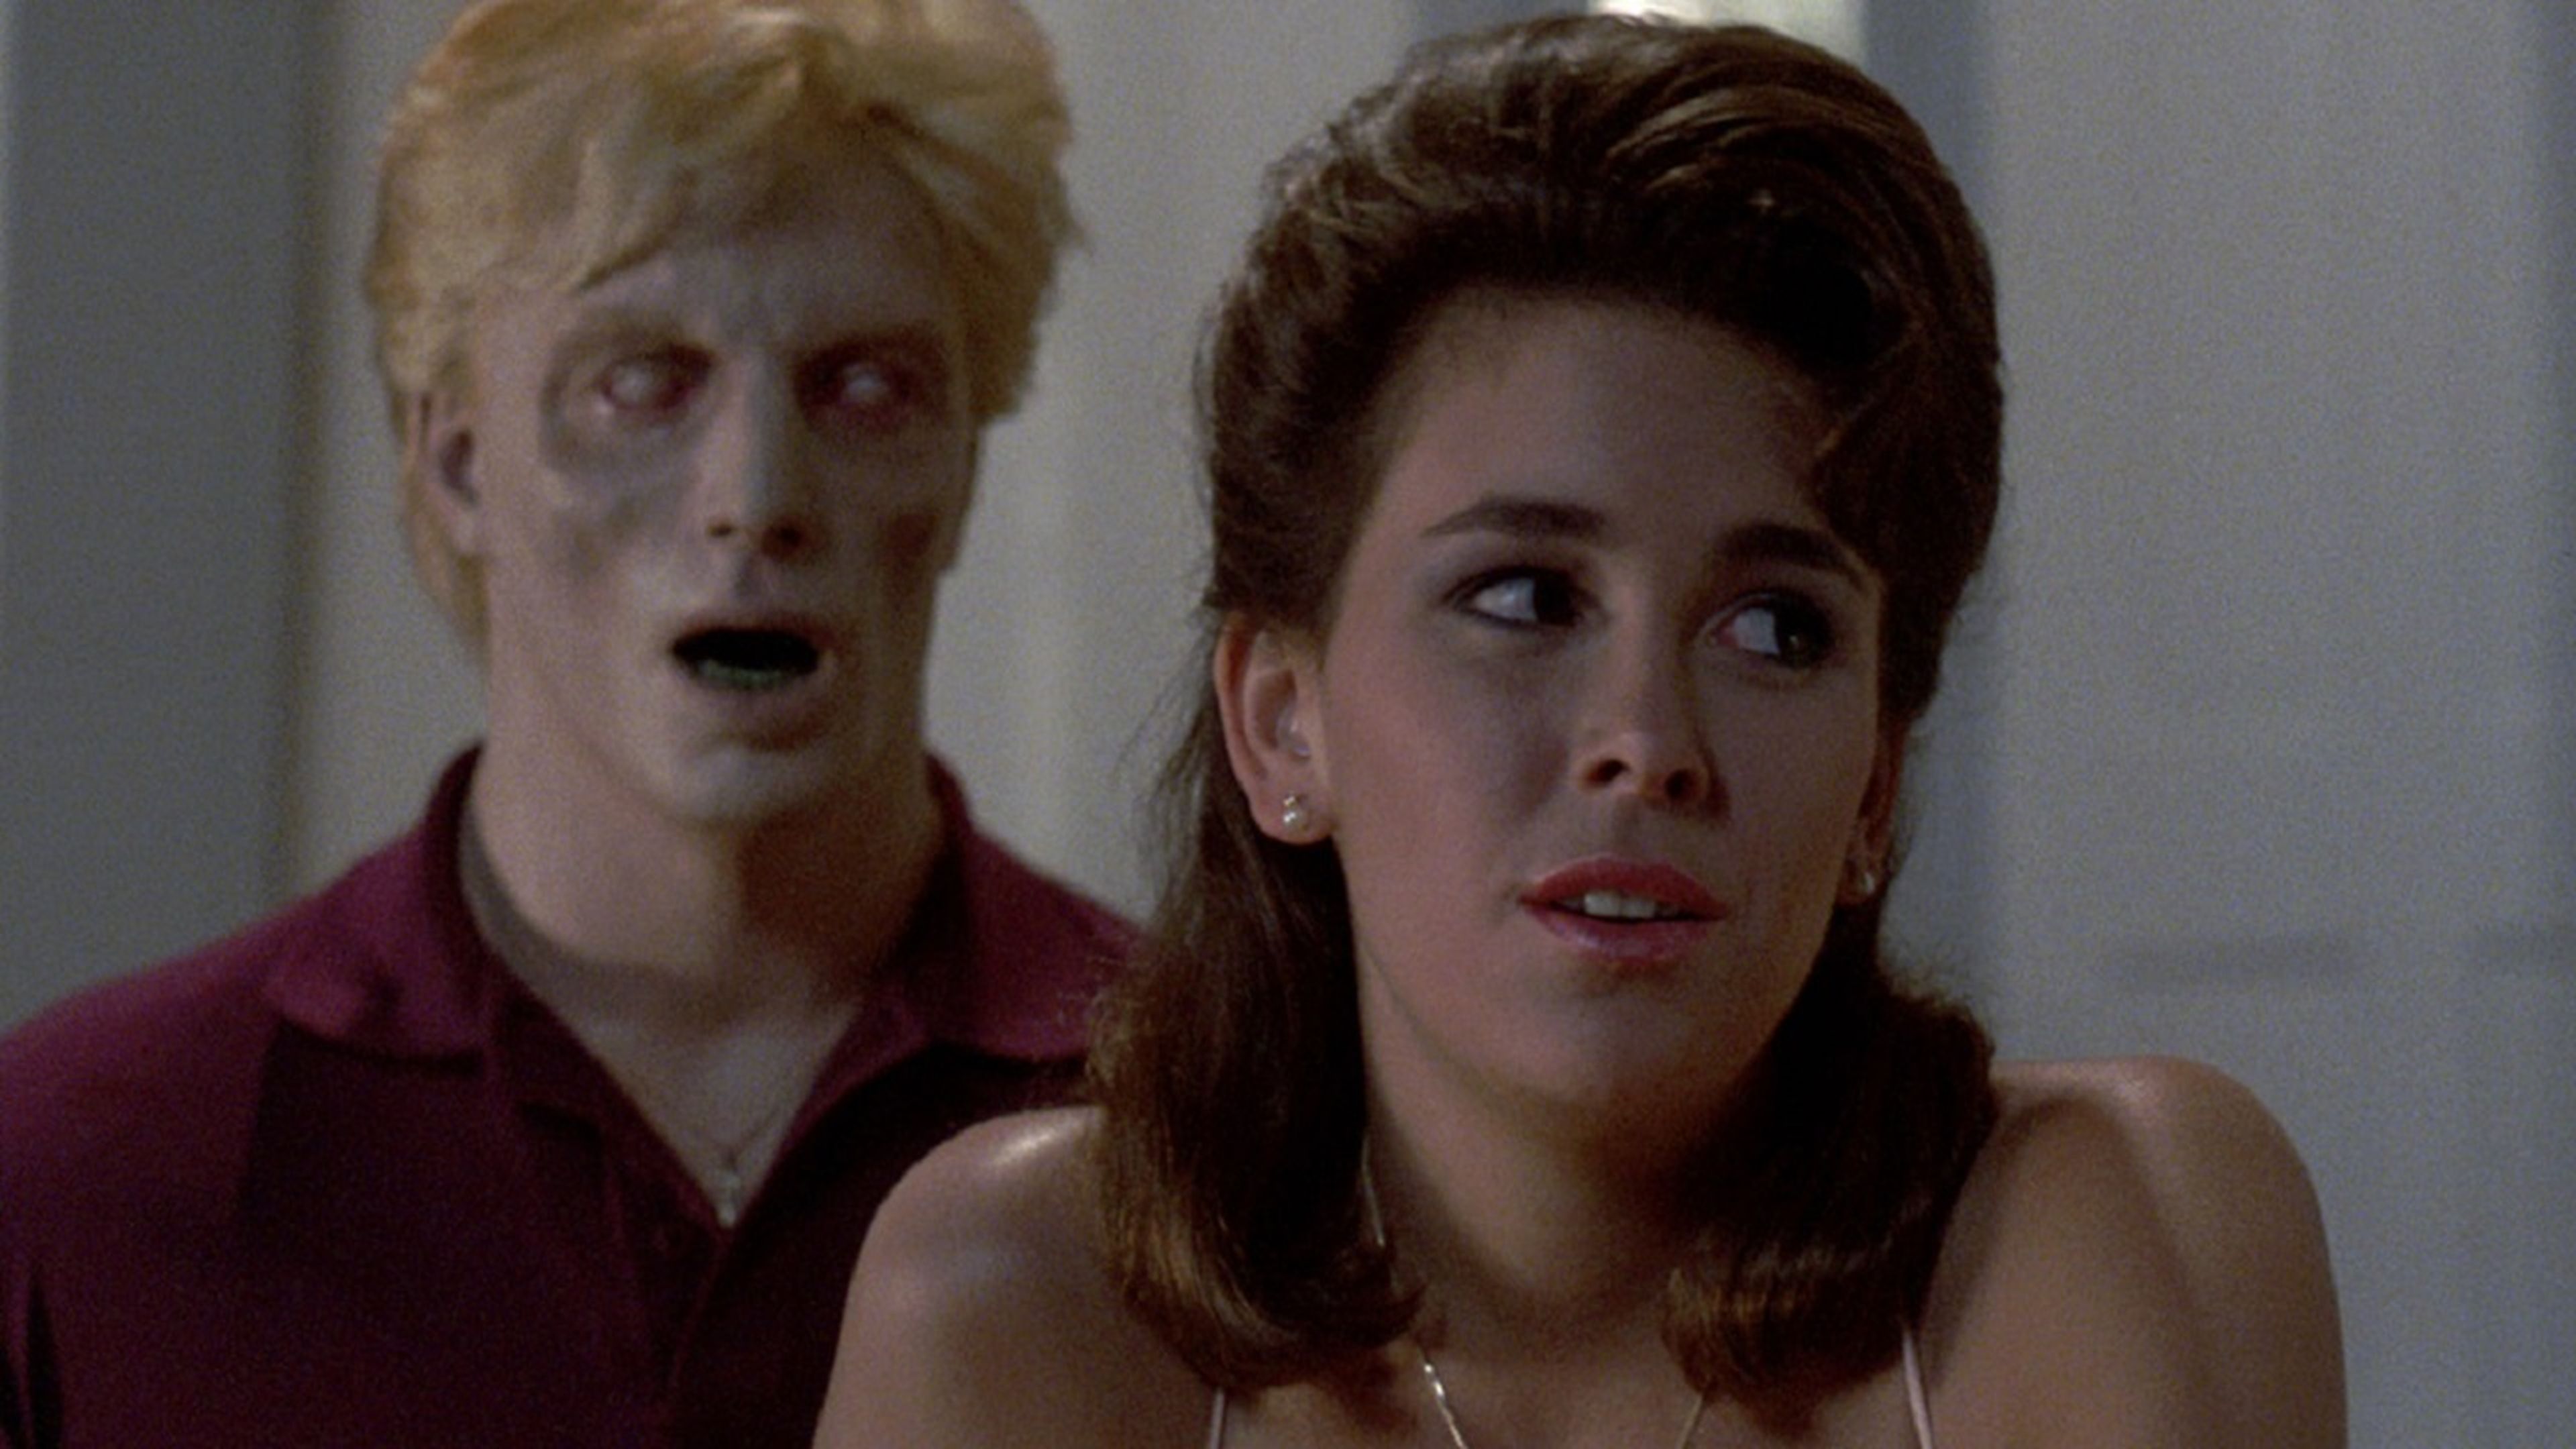 Night of the creeps recover